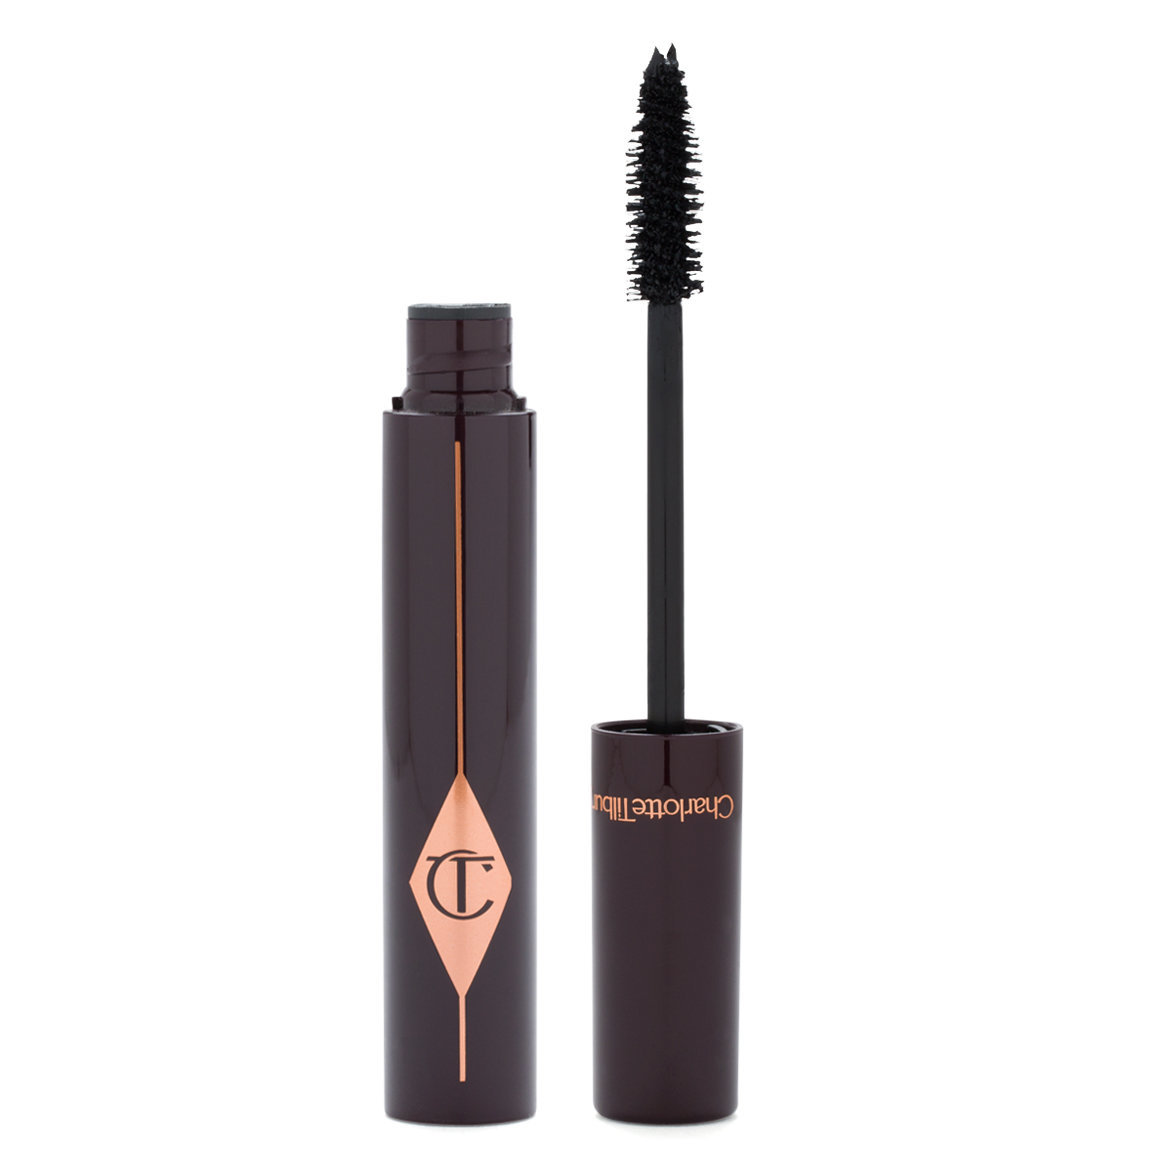 Charlotte Tilbury Full Fat Lashes alternative view 1 - product swatch.